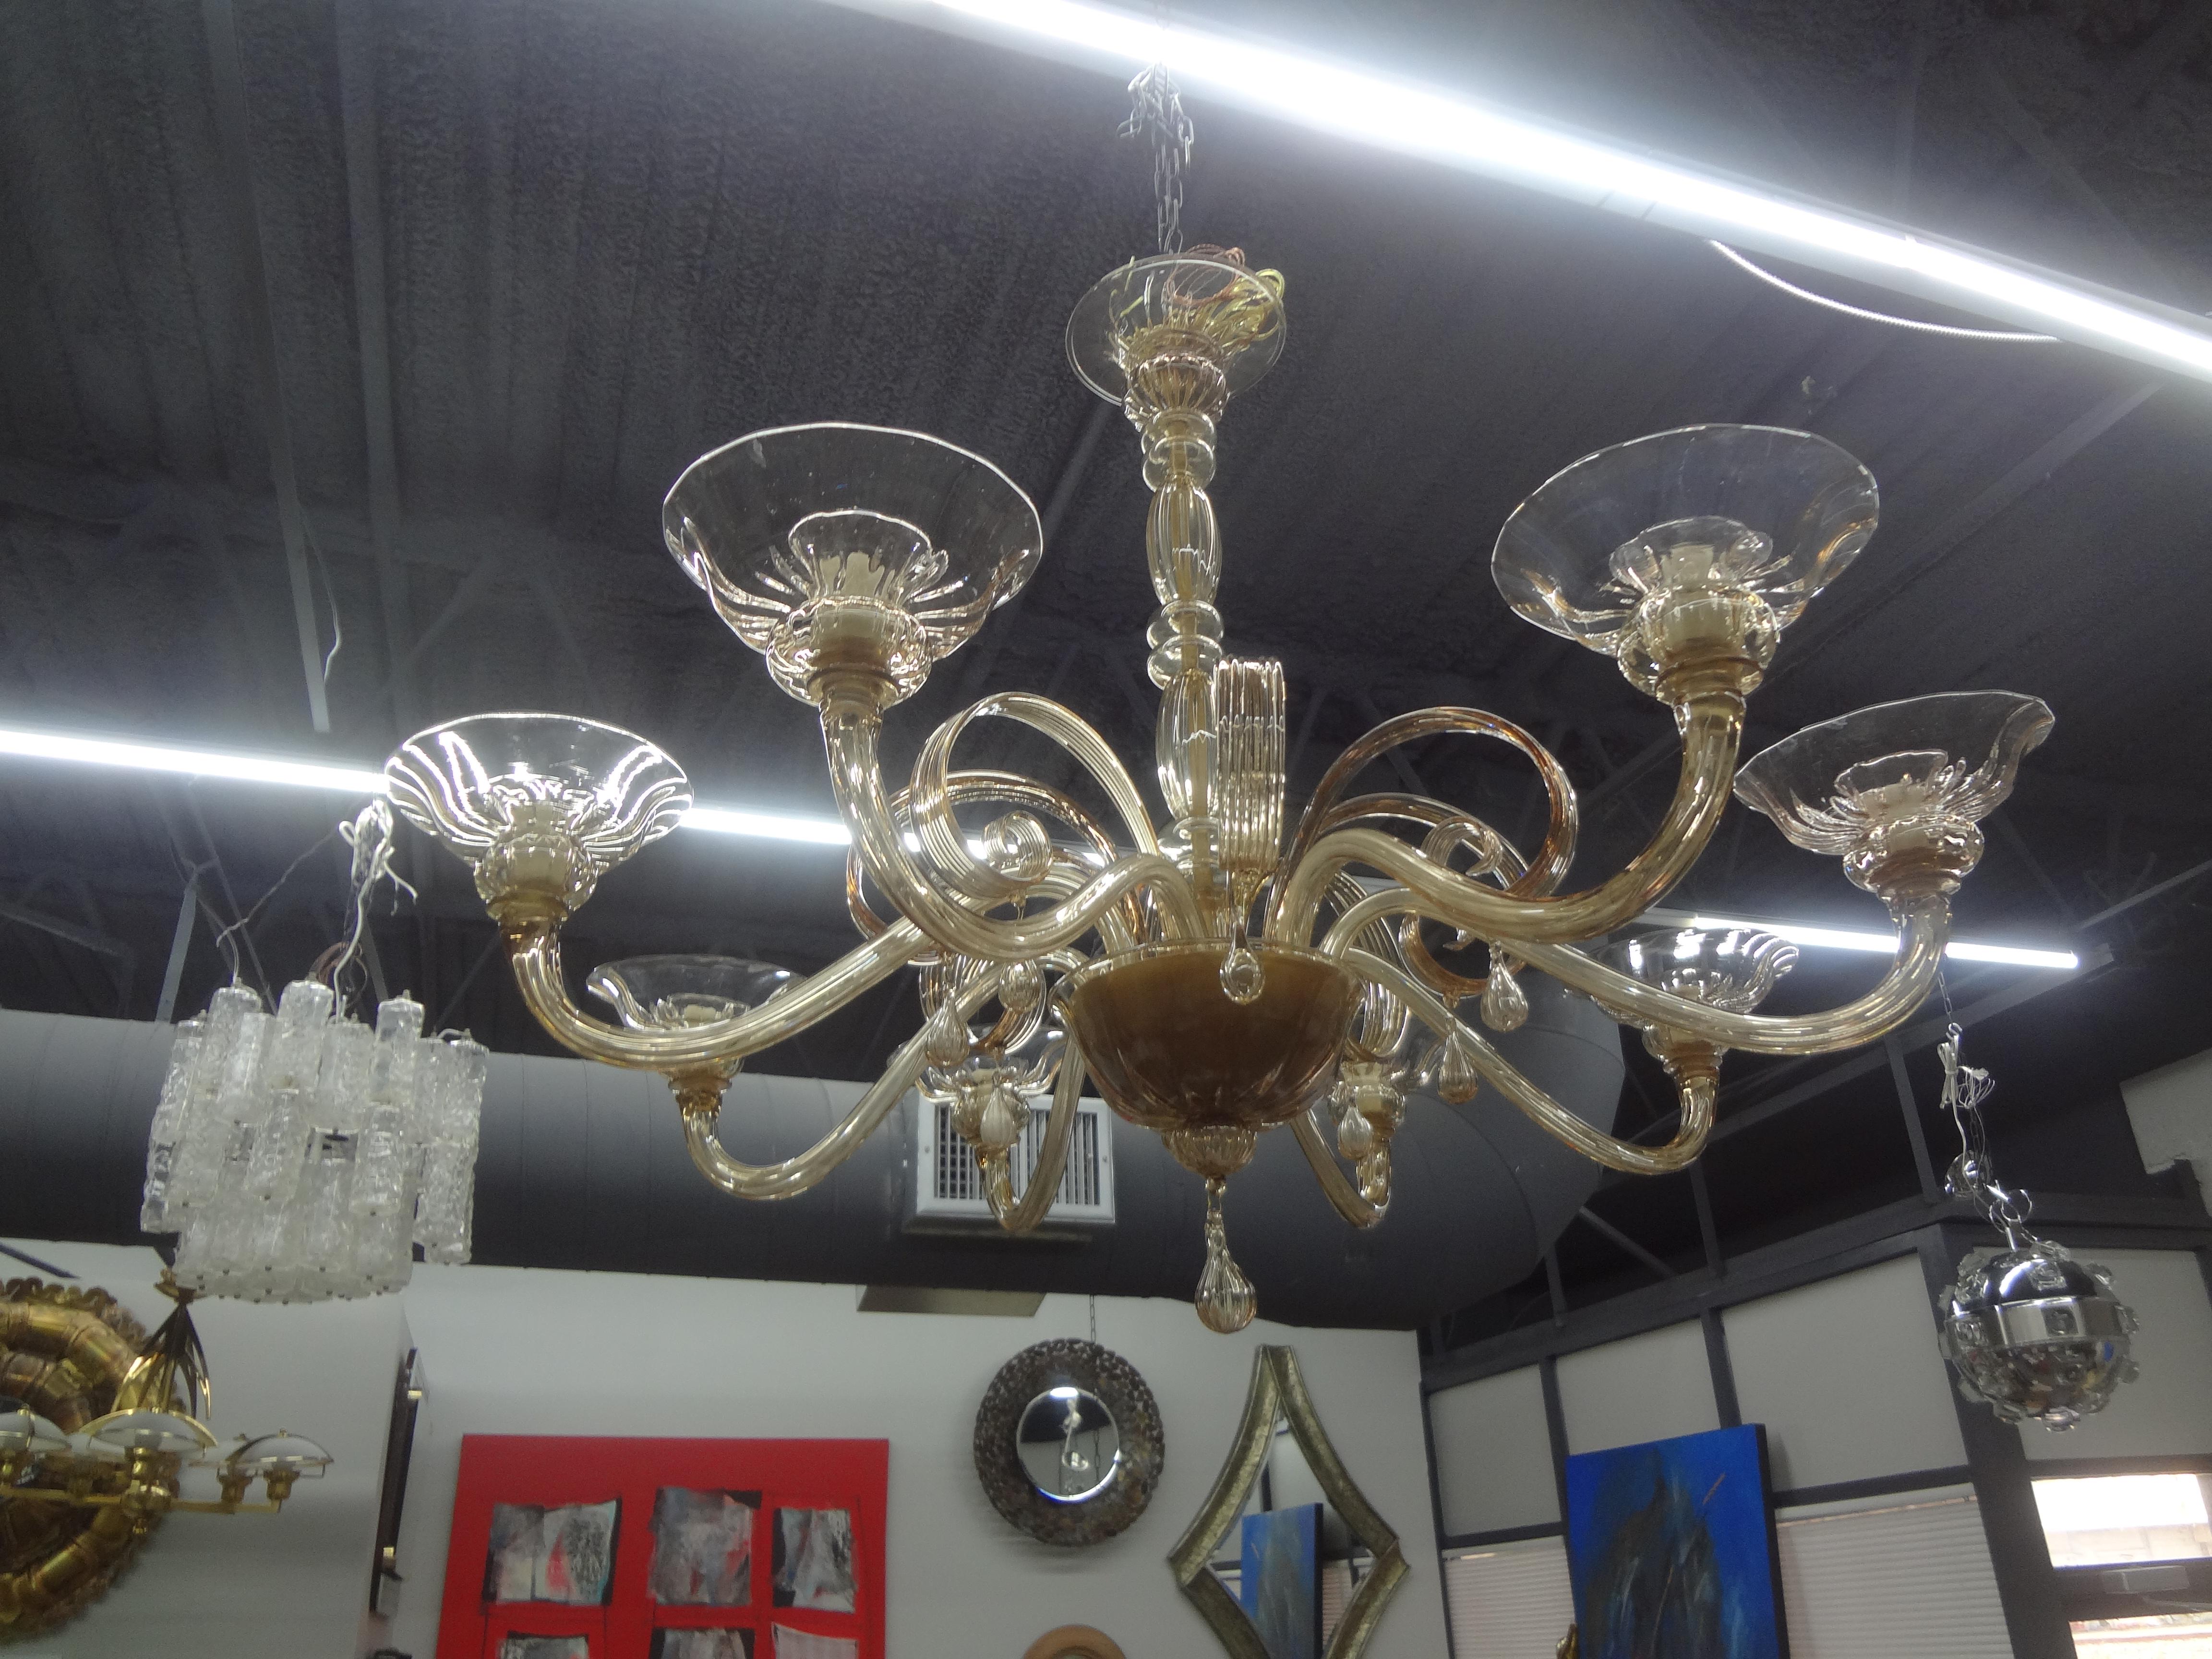 Large Murano Chandelier In Gold Glass Attributed To Venini.
This stunning 45 inch diameter Murano chandelier was hand blown in a gorgeous gold glass and has 8 arms or lights with beautifully shaped curled glass and drop. This lovely Venetian glass